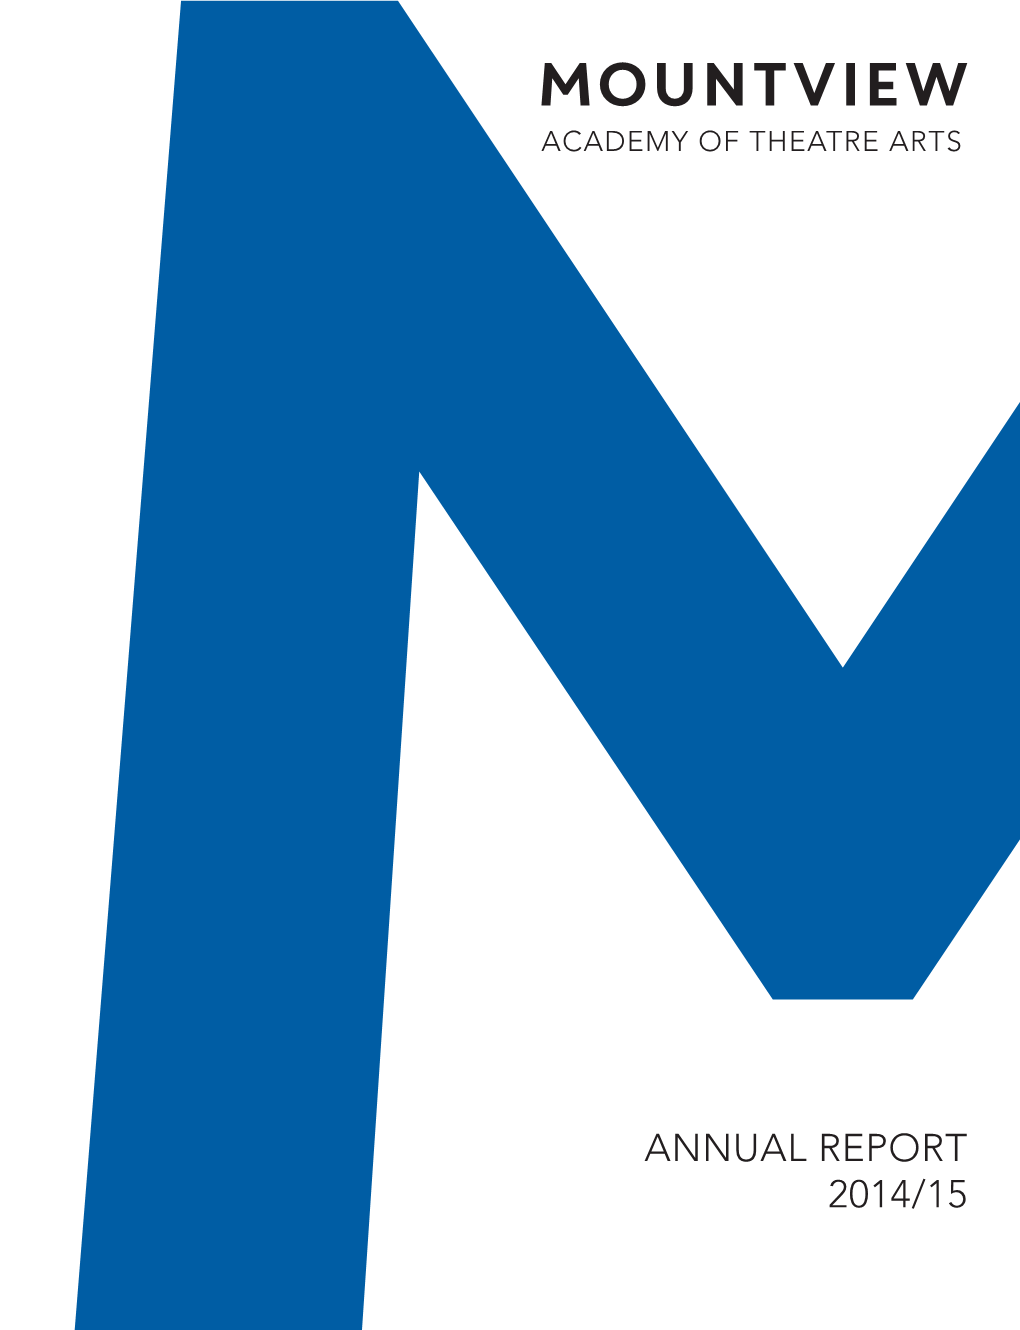 ANNUAL REPORT 2014/15 Contents